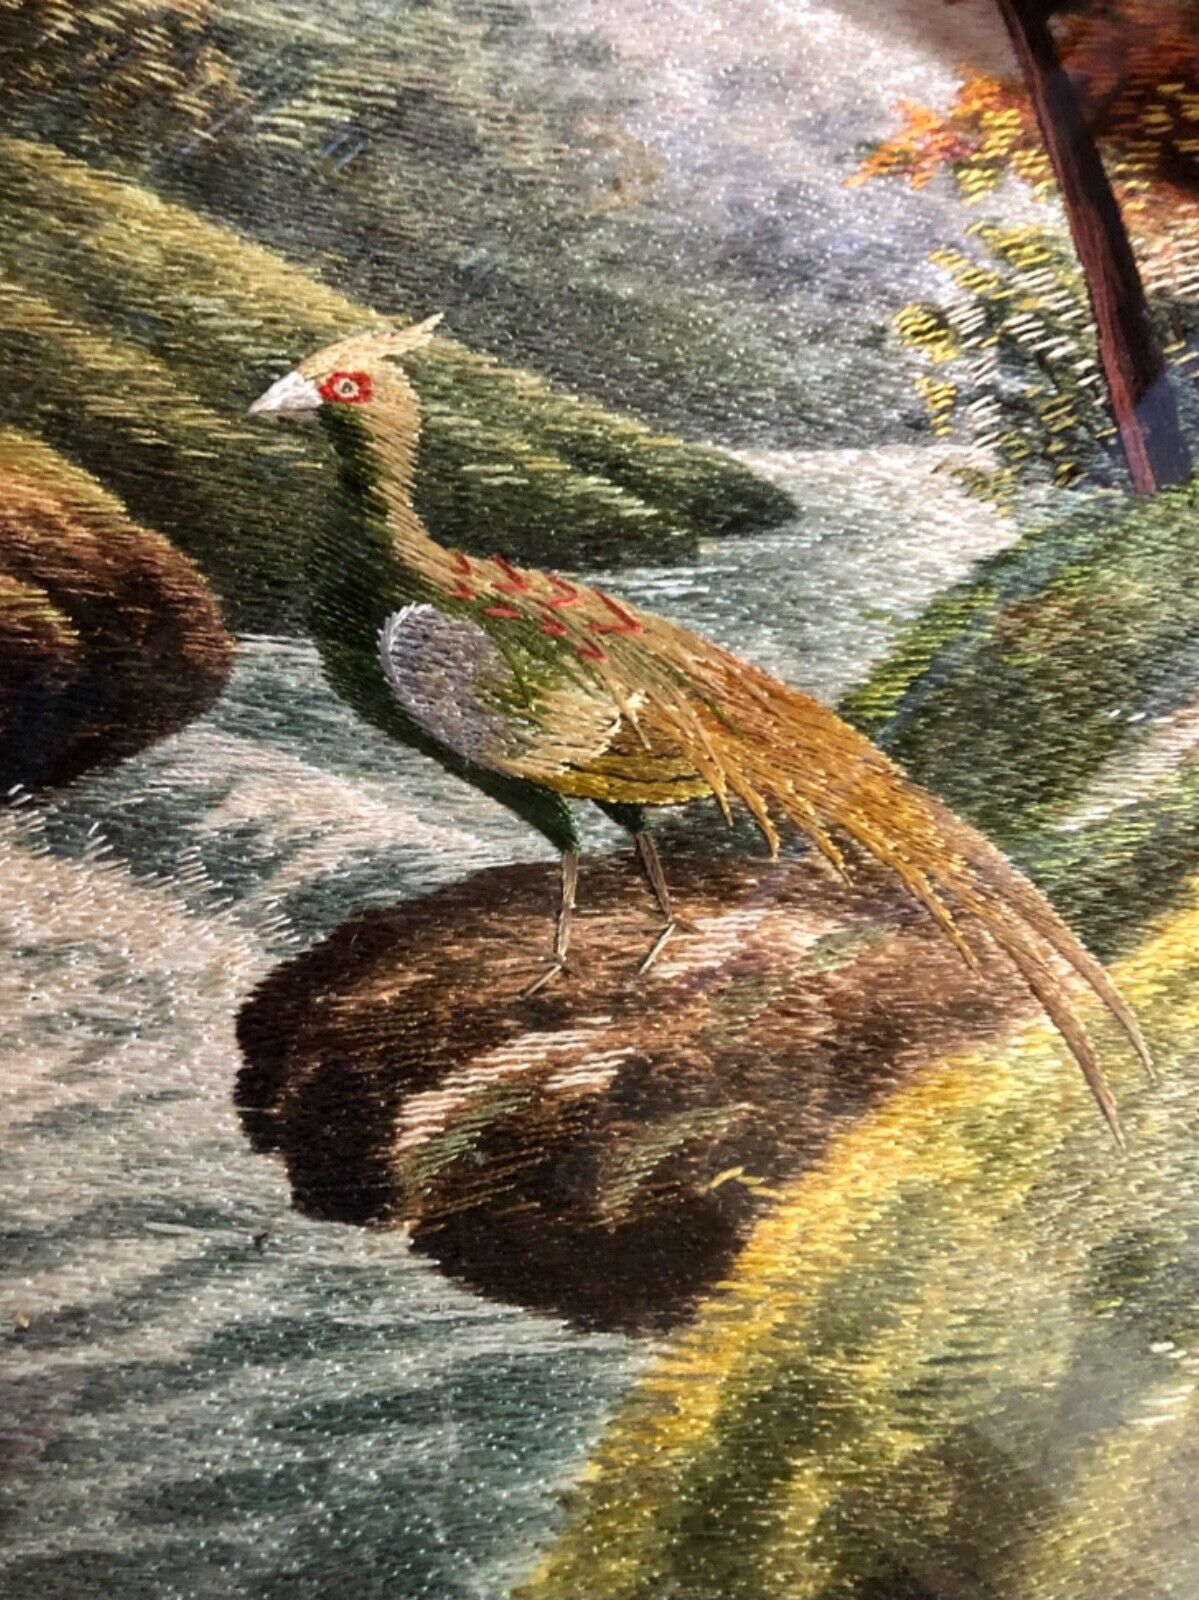 Magnificent Antique Asian Hand Stitched Silk Pheasant Art Framed ~23x17.5